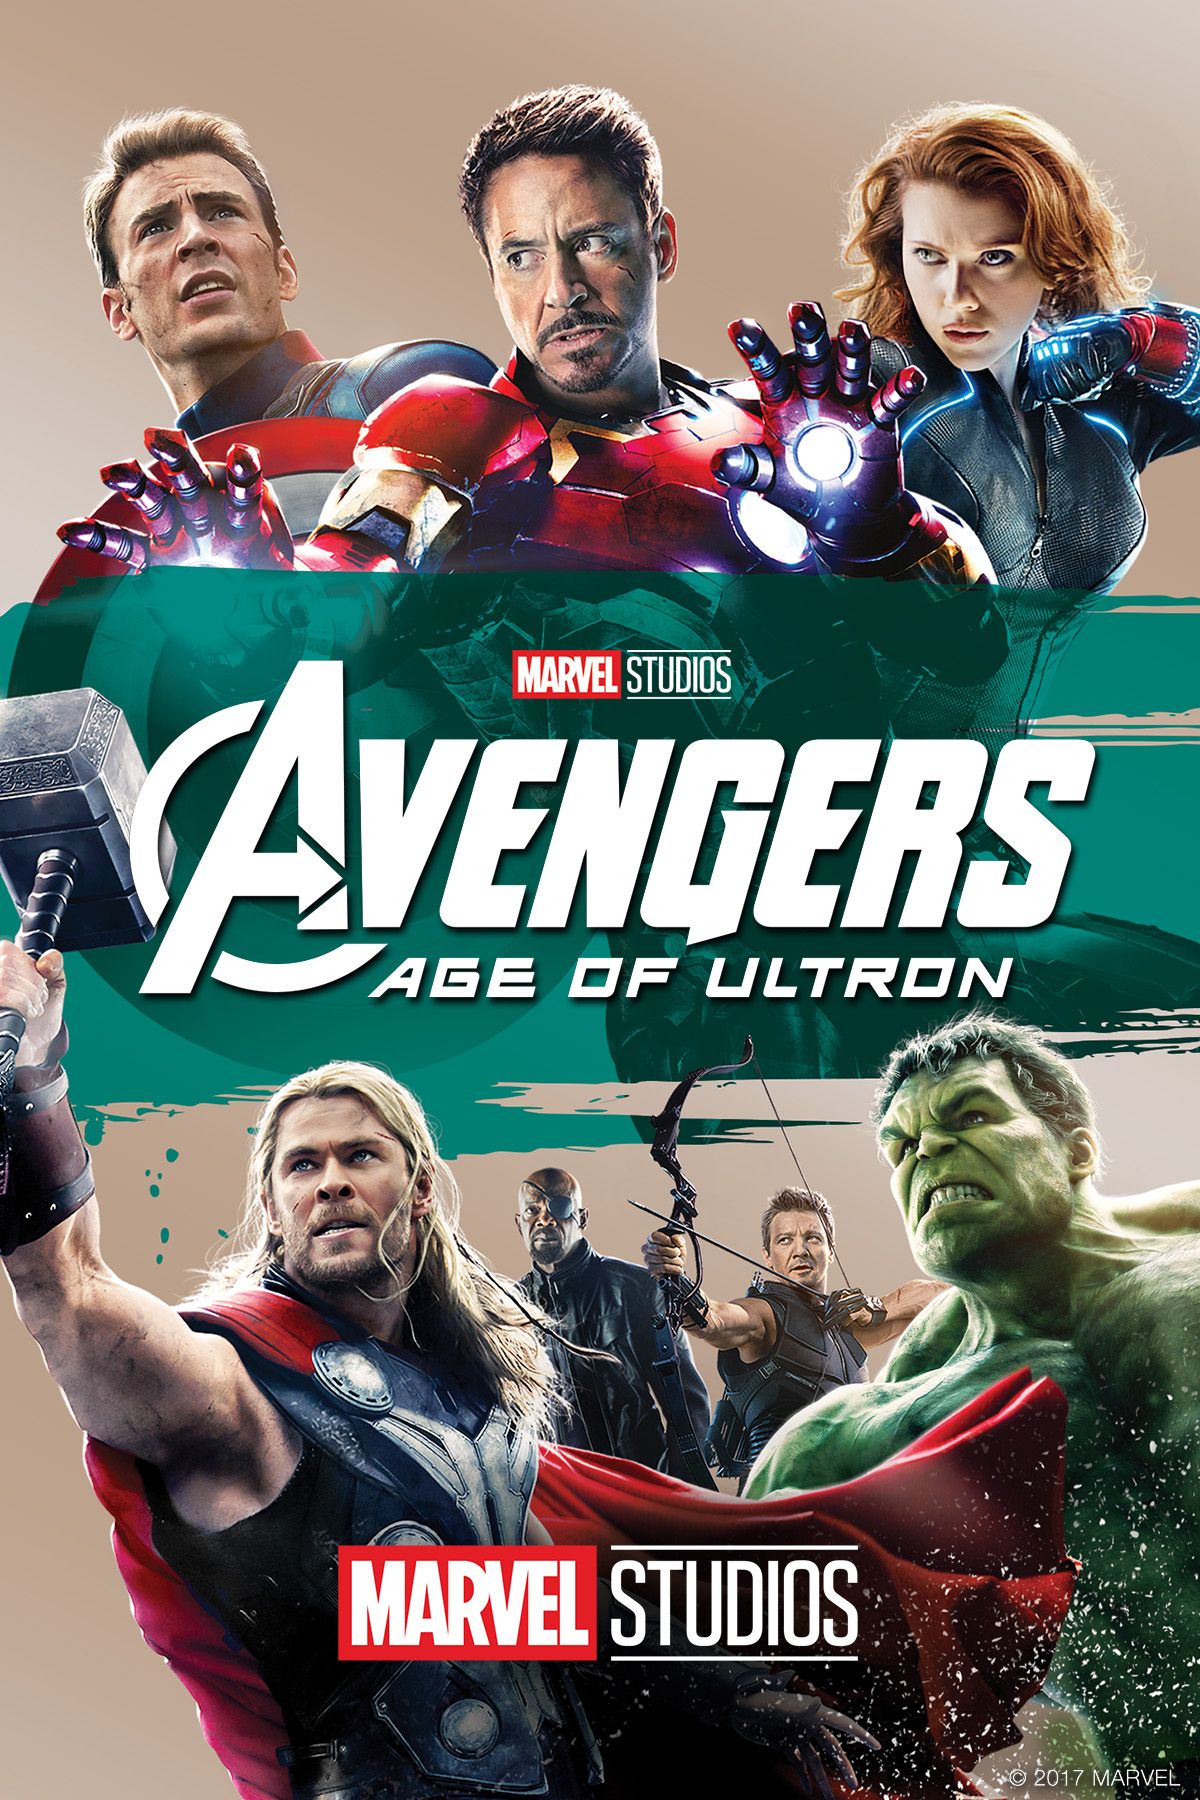 watch avengers age of ultron free online full movie